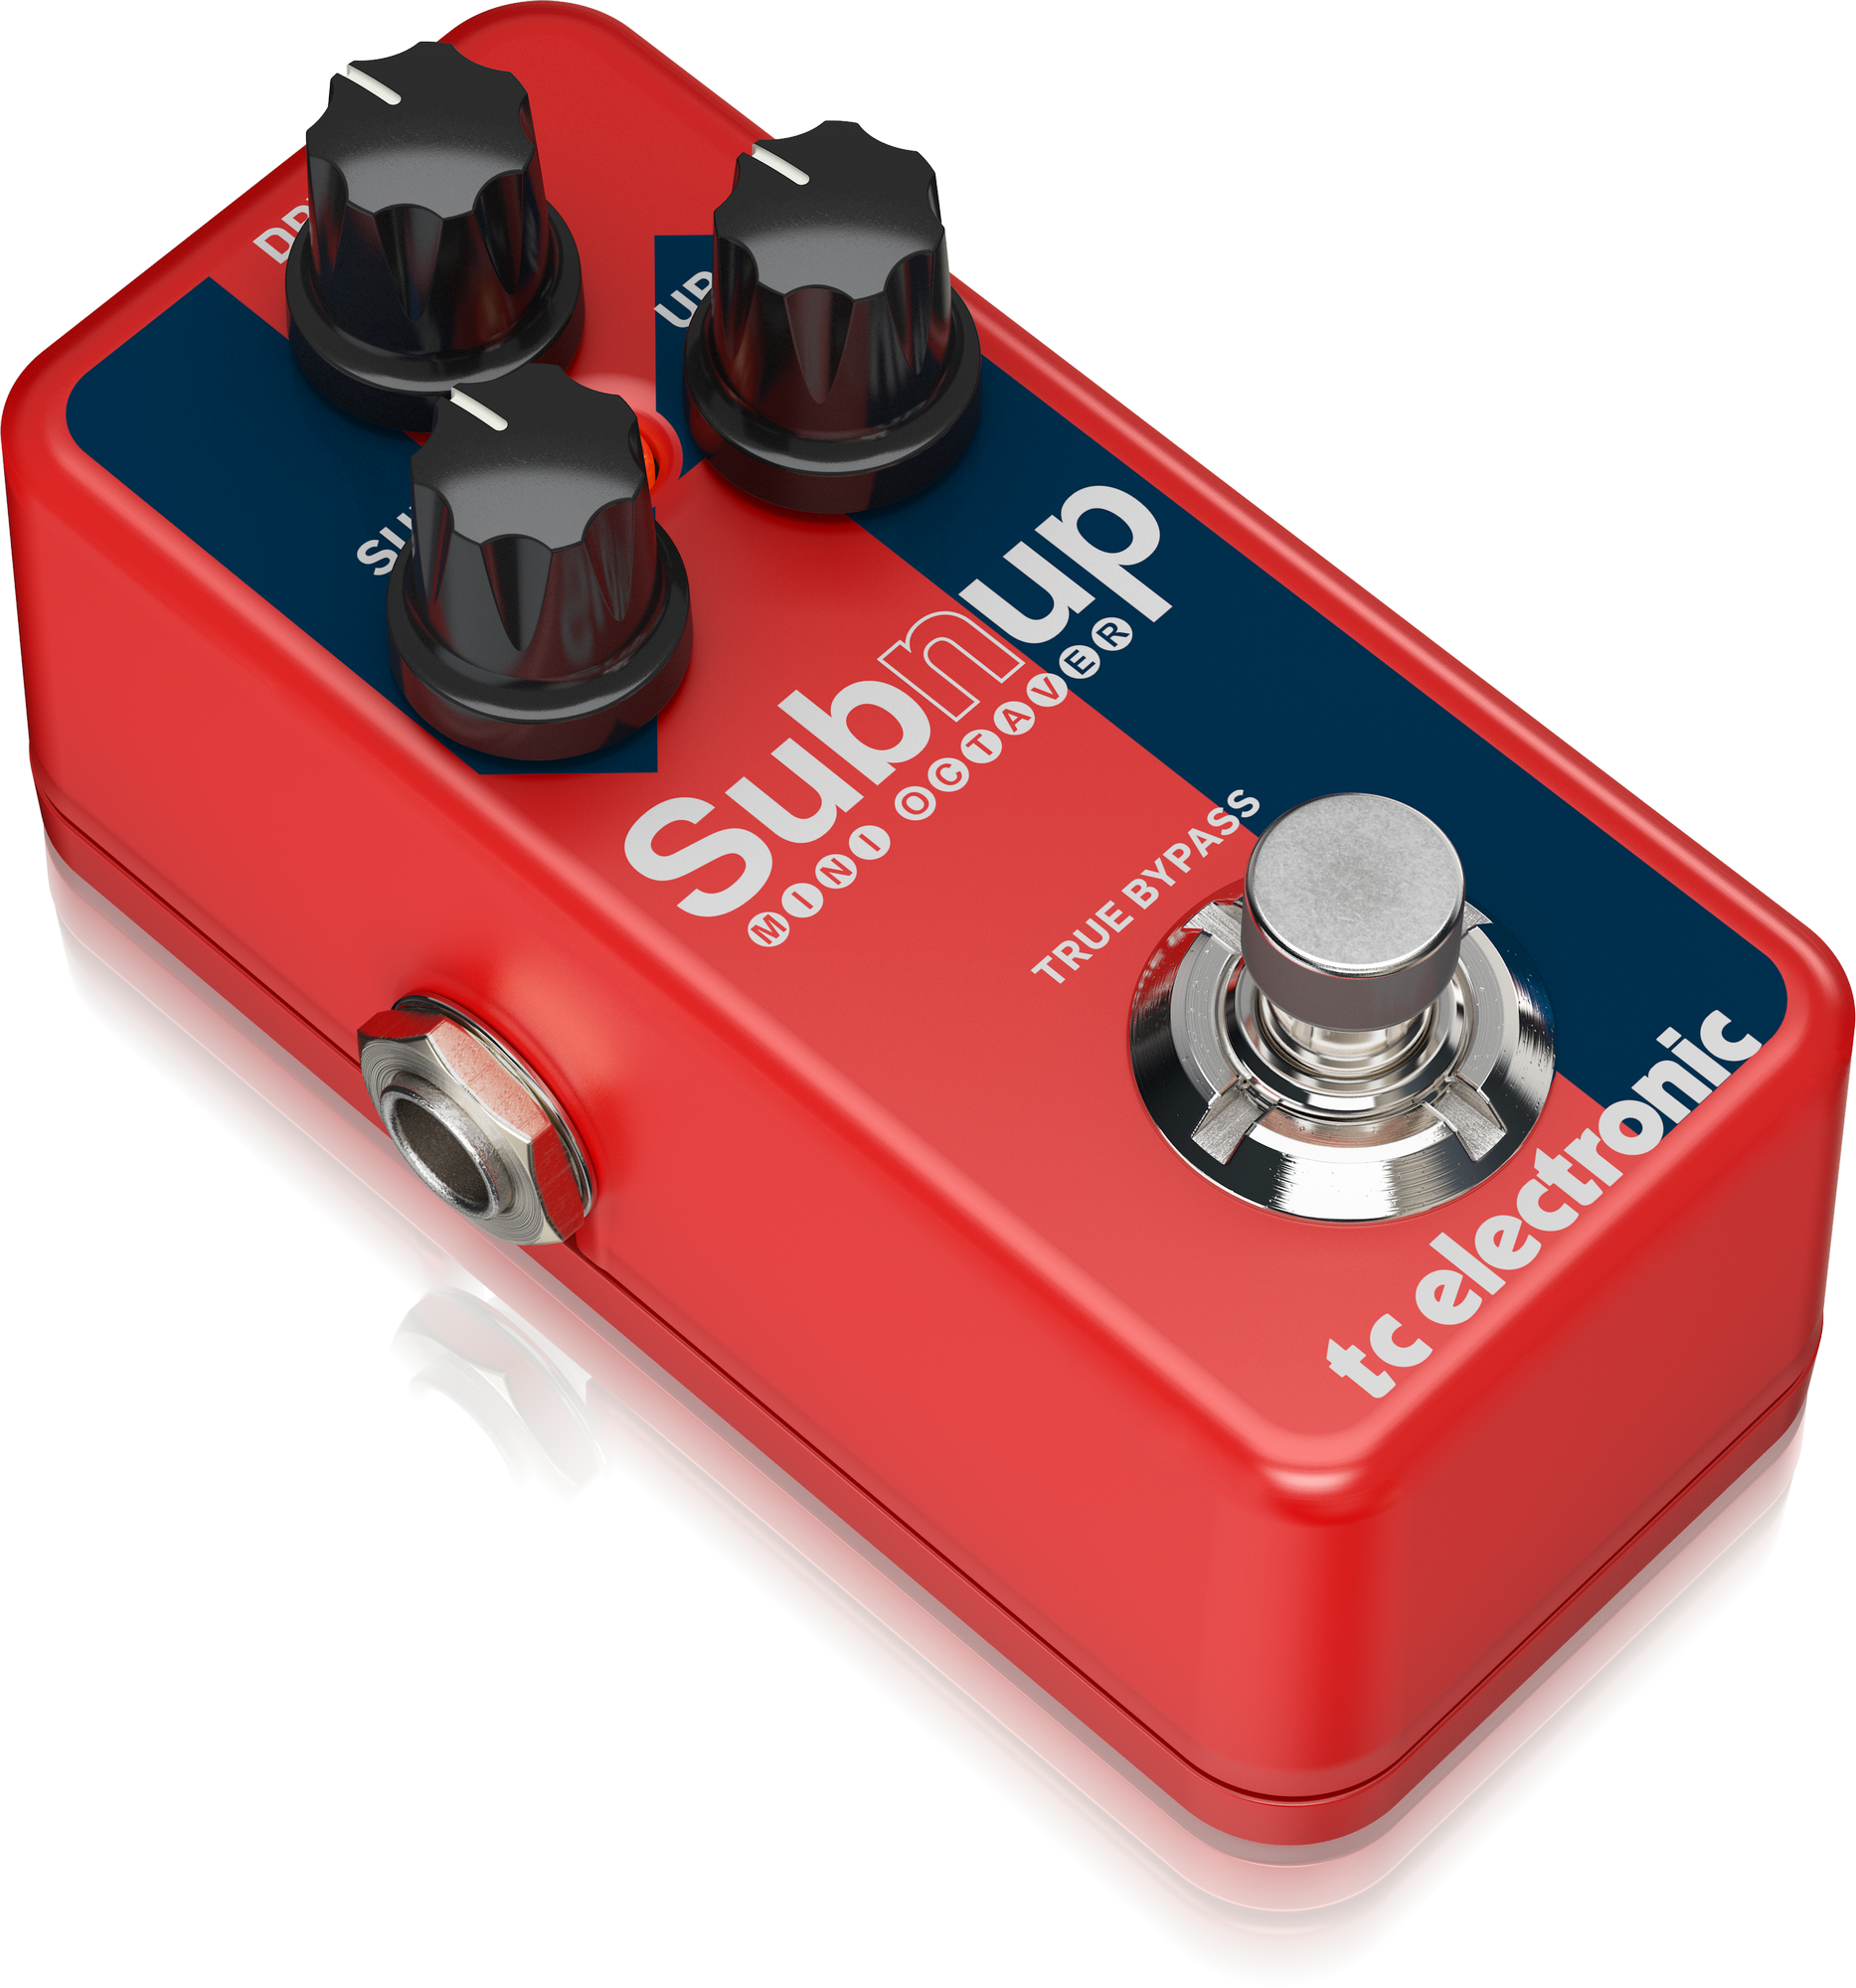 TC Electronic Sub 'n' Up Mini Octaver Compact Version Of Hugely Popular Sub 'n' Up Octaver With Advanced Polyponic Octave Engine And Toneprint-enabled Technology For Easy Custom Effects, TC ELECTRONIC, EFFECTS, tc-electronic-effects-tc-sub-n-up-mini-octaver, ZOSO MUSIC SDN BHD